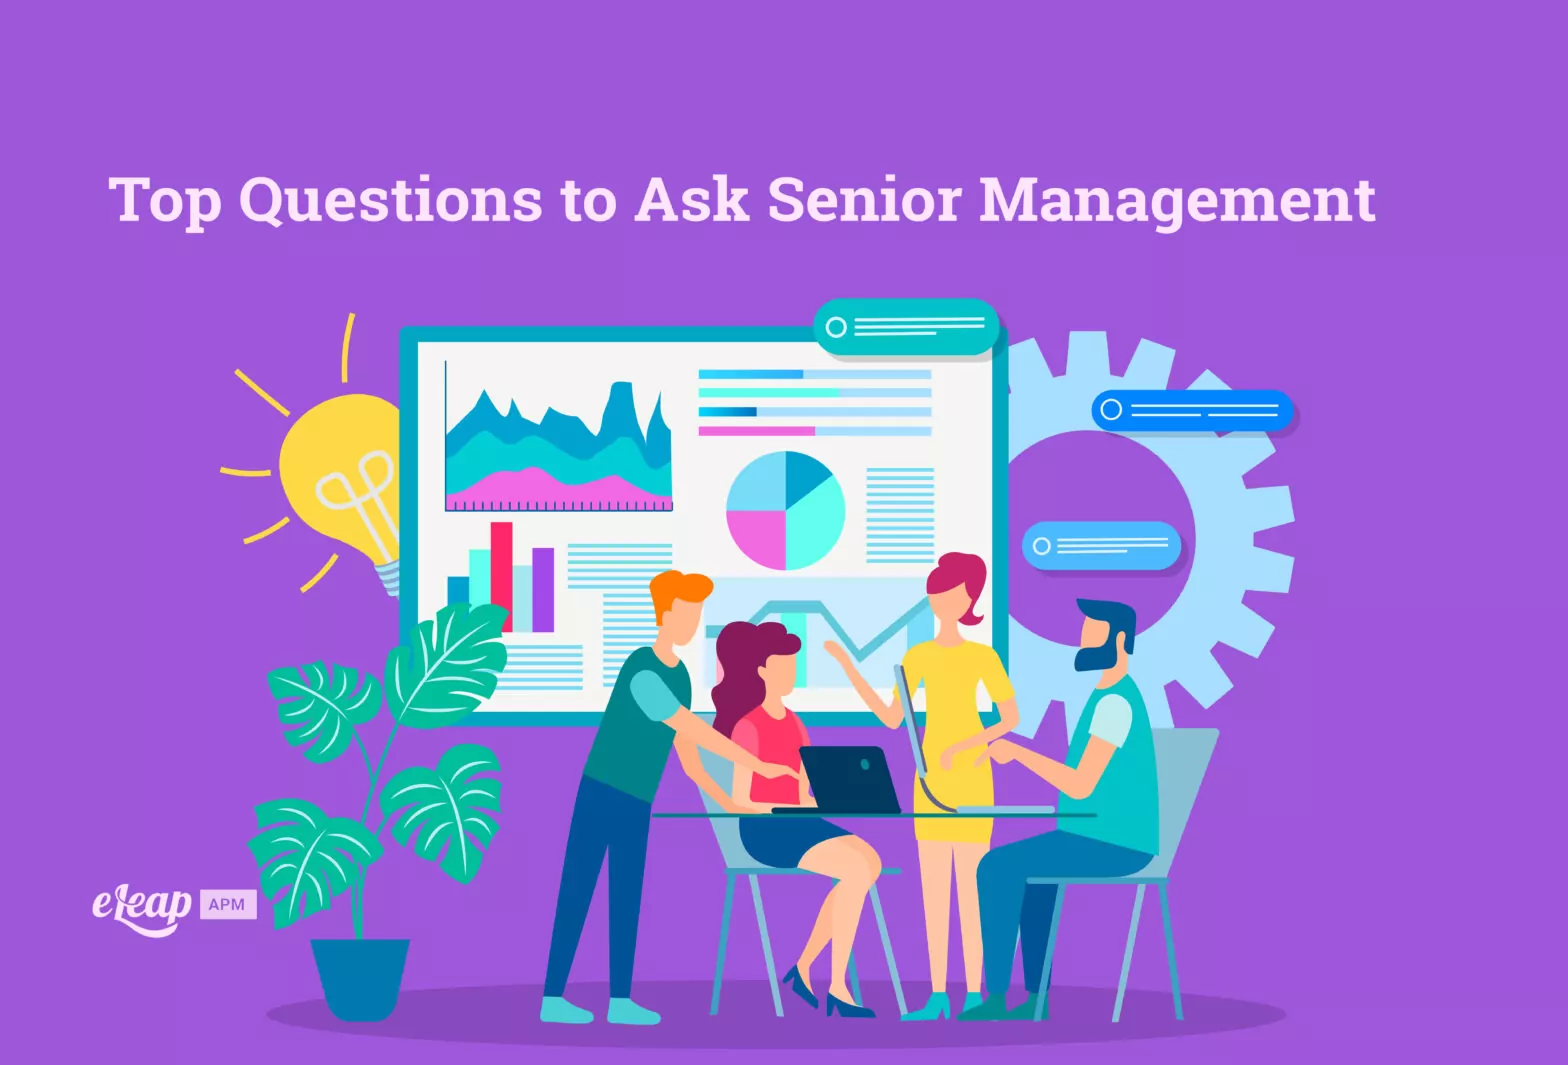 Top Questions to Ask Senior Management